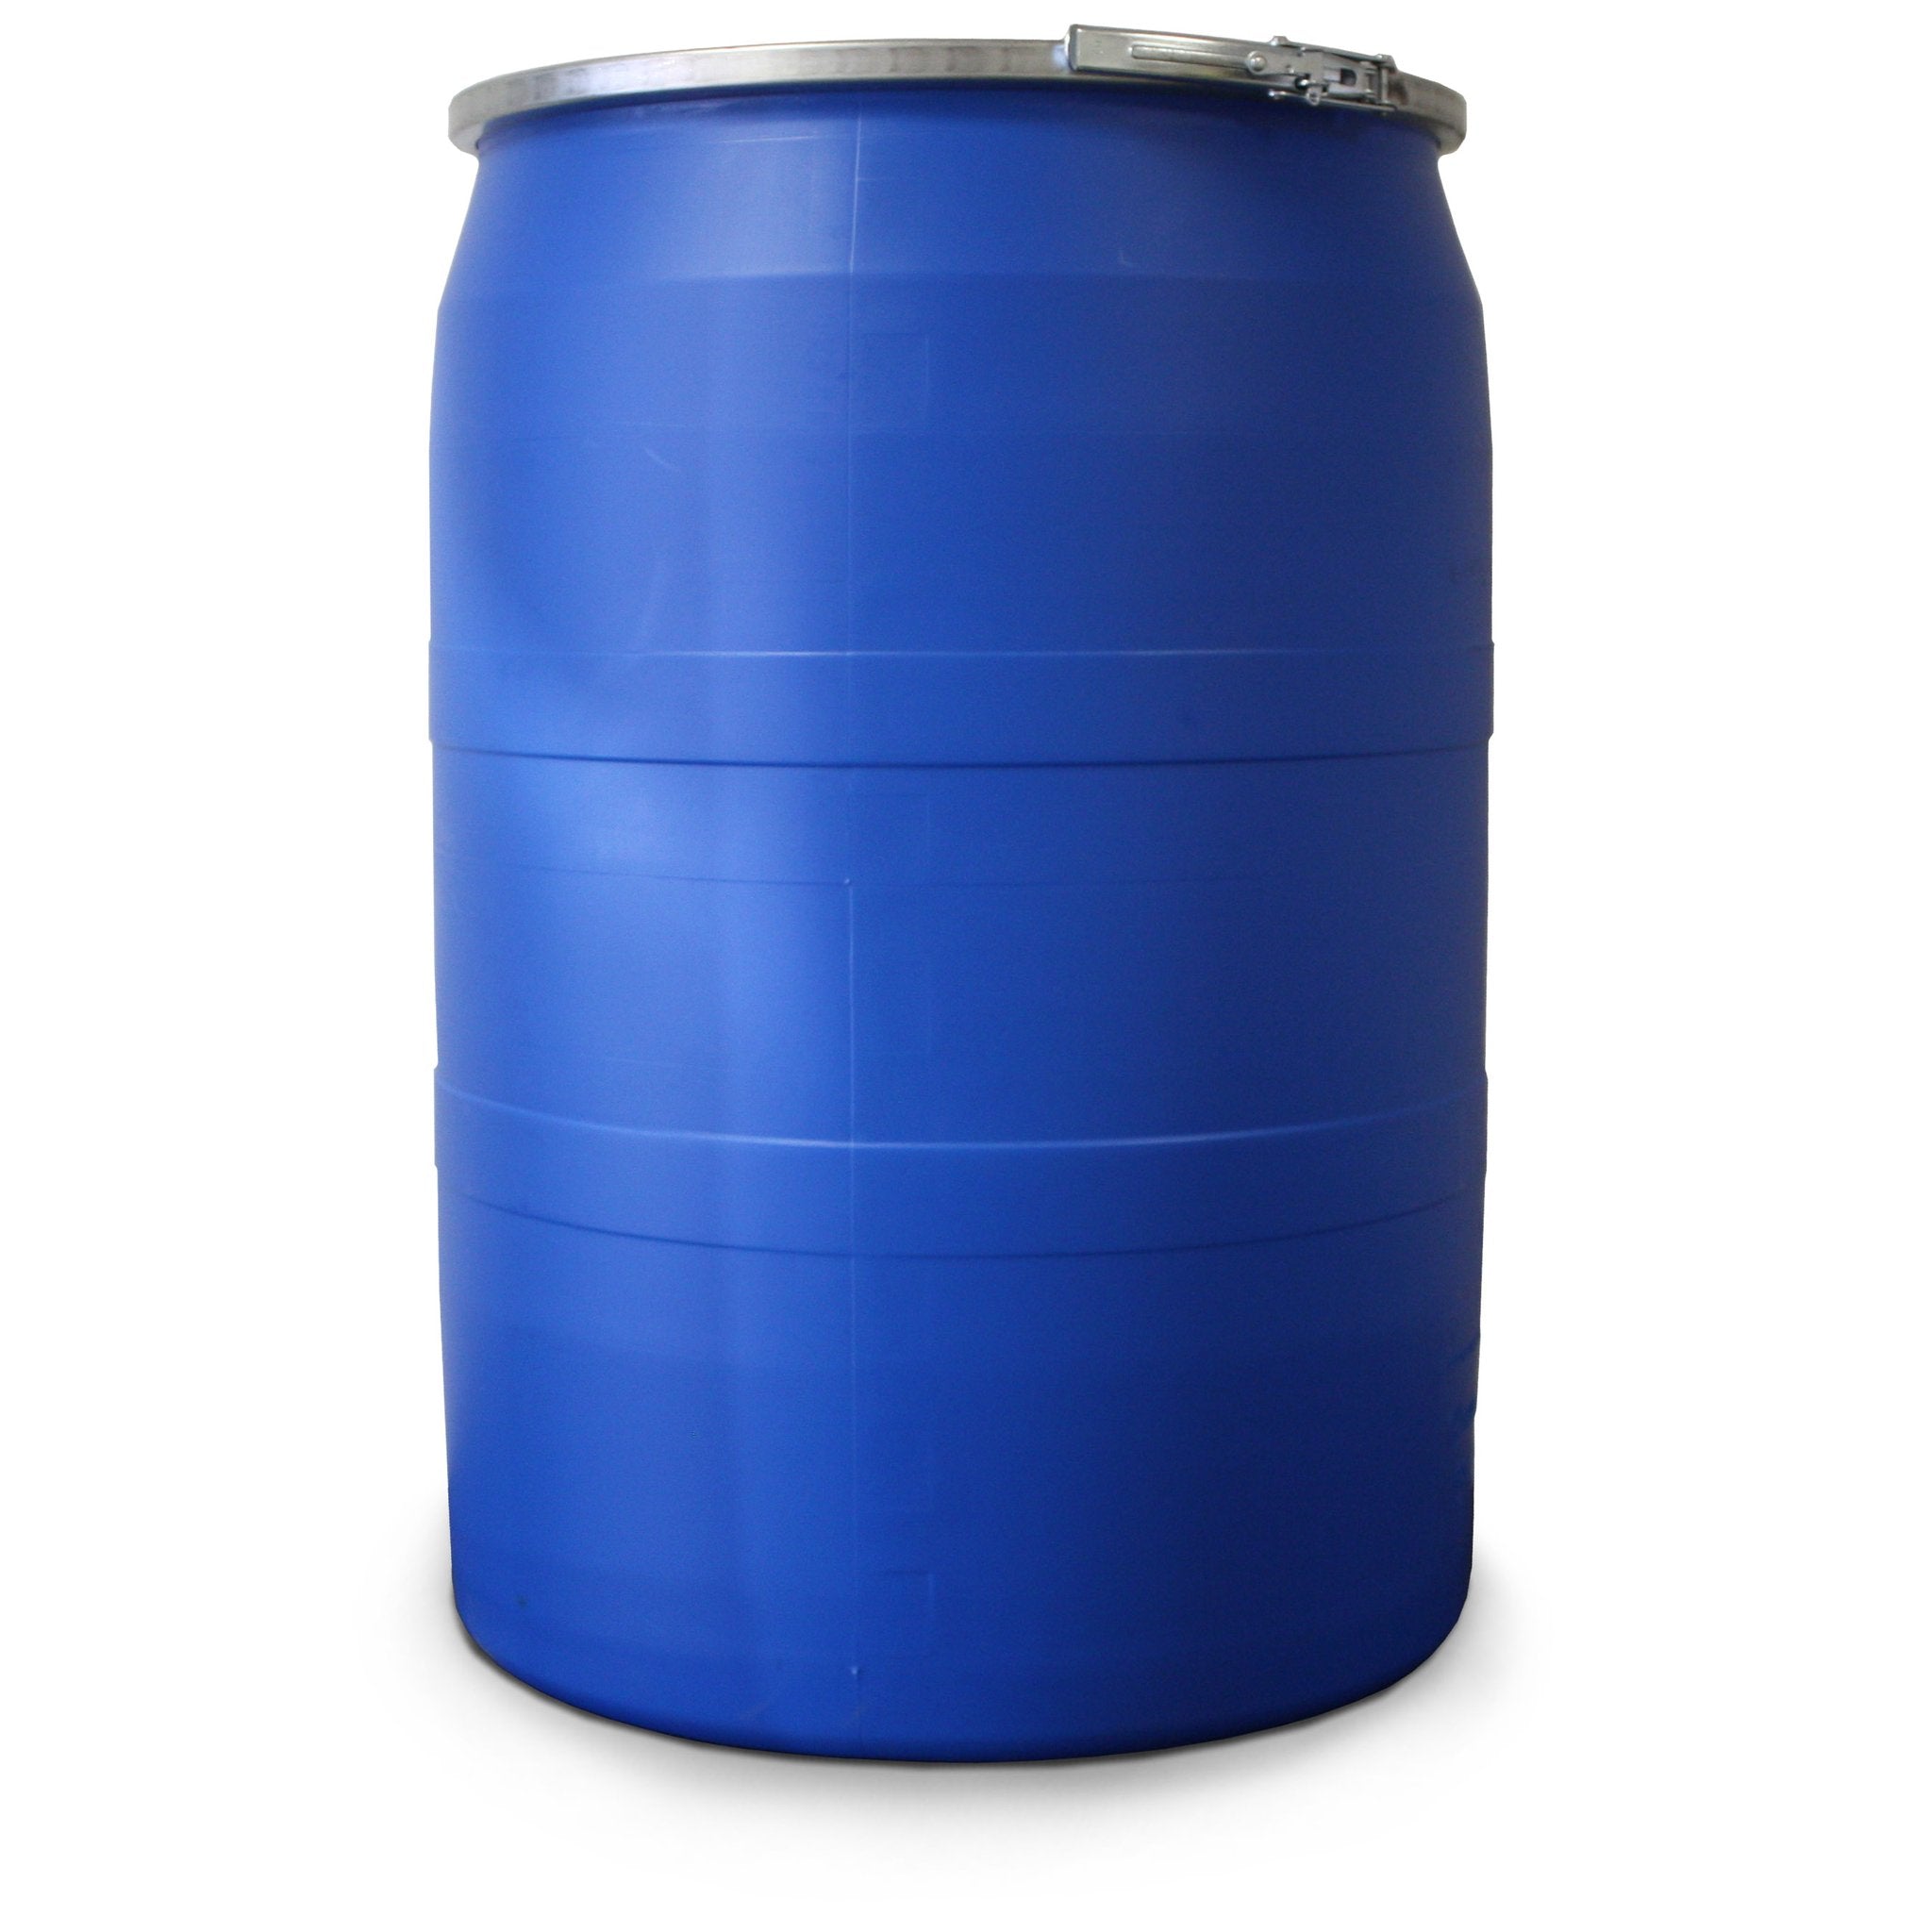 XSORB Universal Spill Clean-Up 55 gal Drum - 1 EACH-eSafety Supplies, Inc